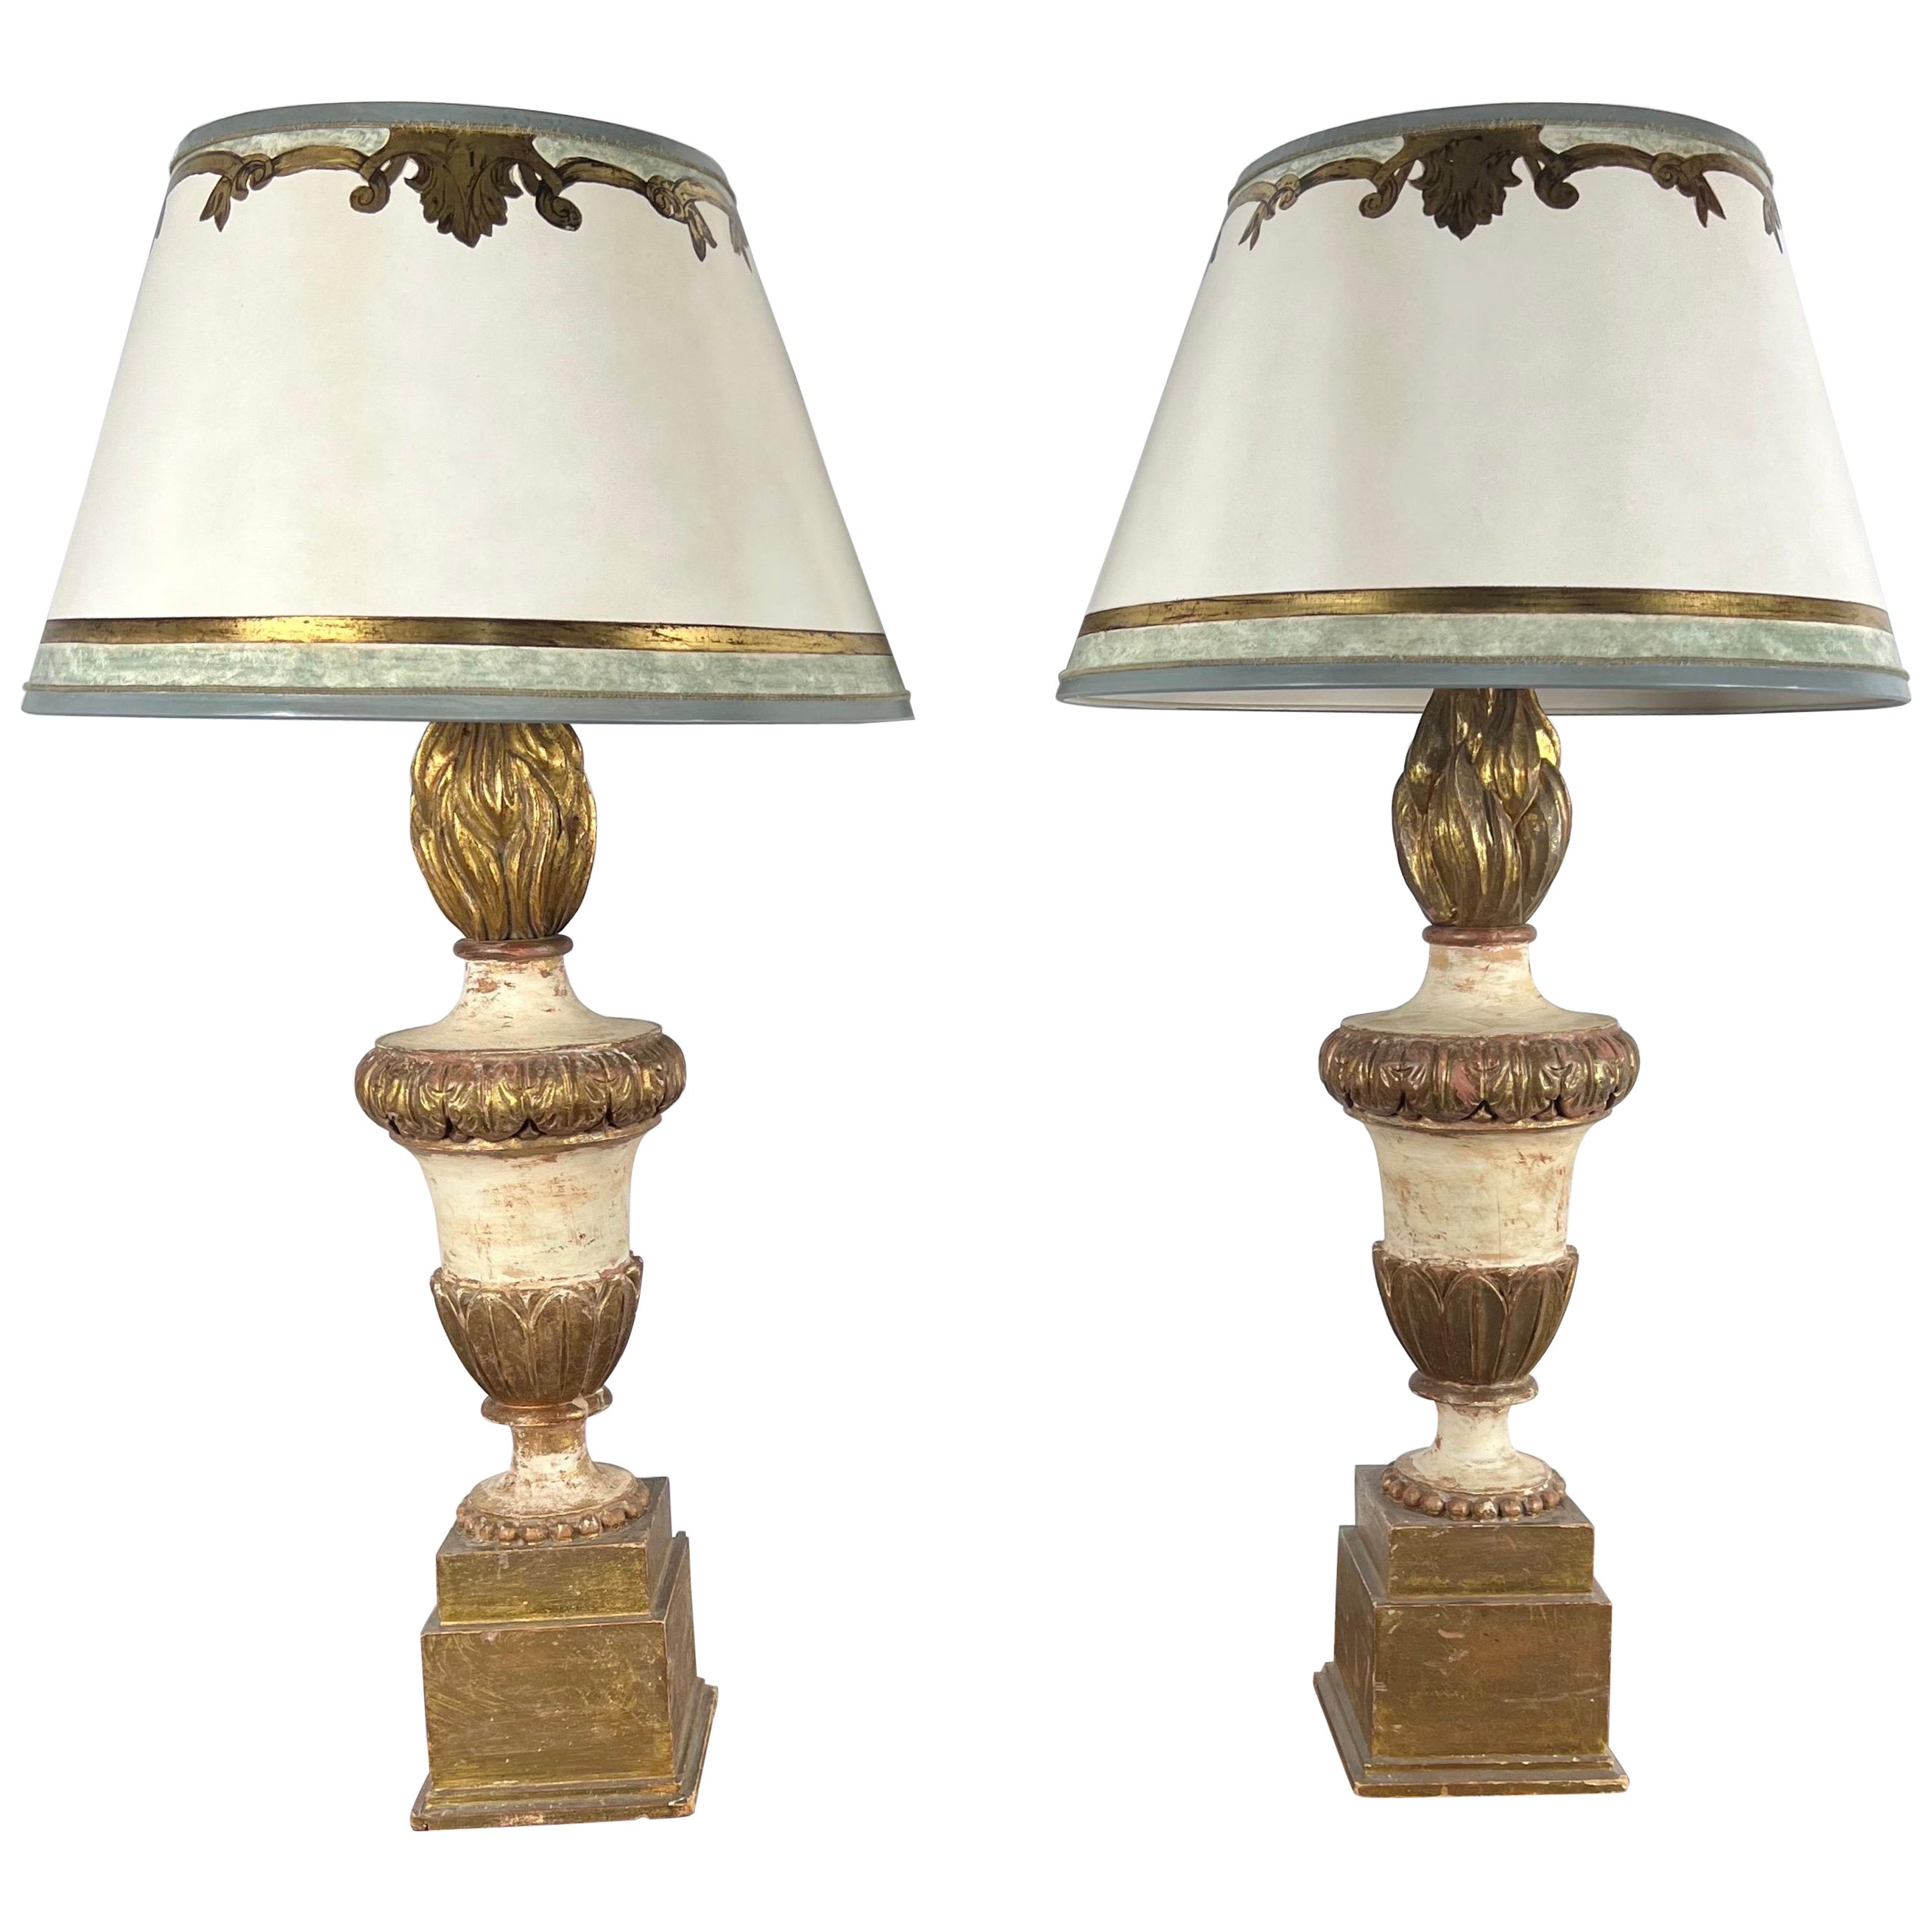 Pair of Painted & Parcel Gilt Carved Flame Lamps w/ Parchment Shades